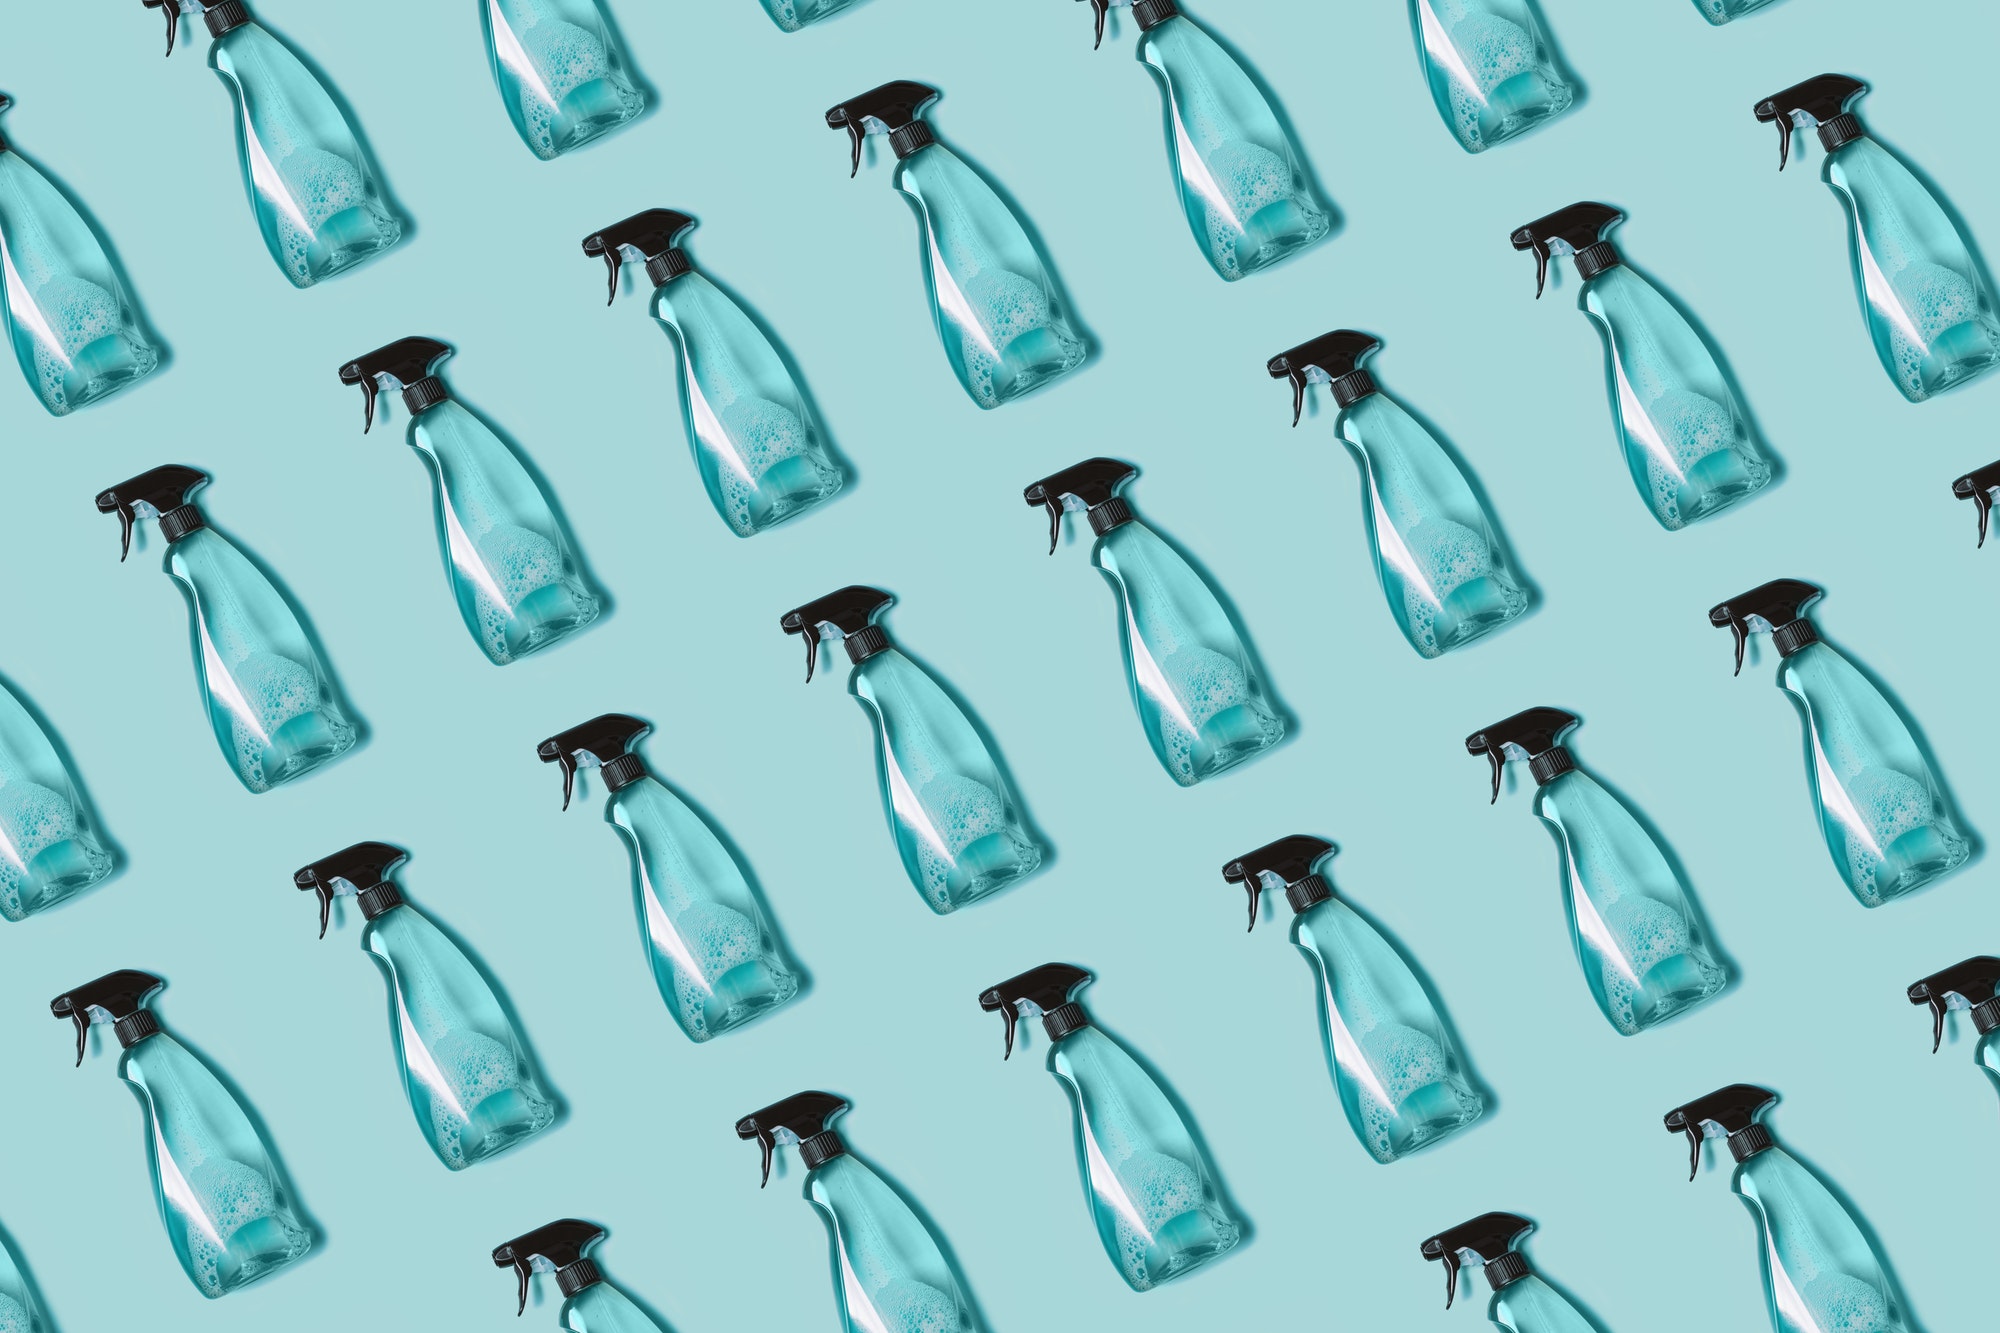 Pattern of transparent plastic bottle of cleaning product